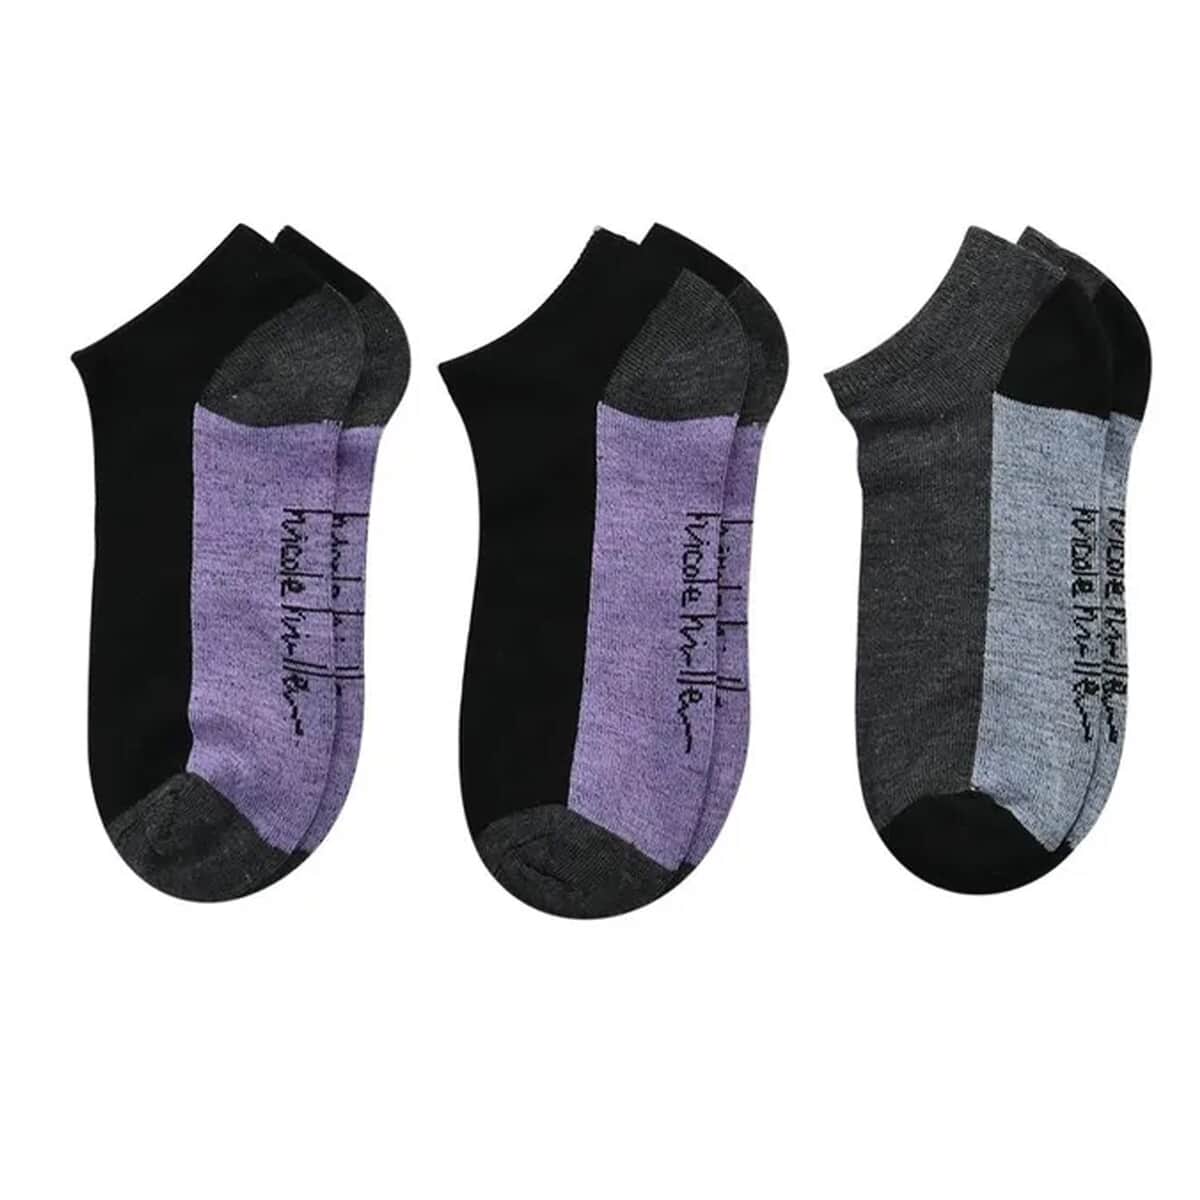 Nicole Miller 10 Pairs No Show Socks (Sizes 4-10) - White/Gray image number 5